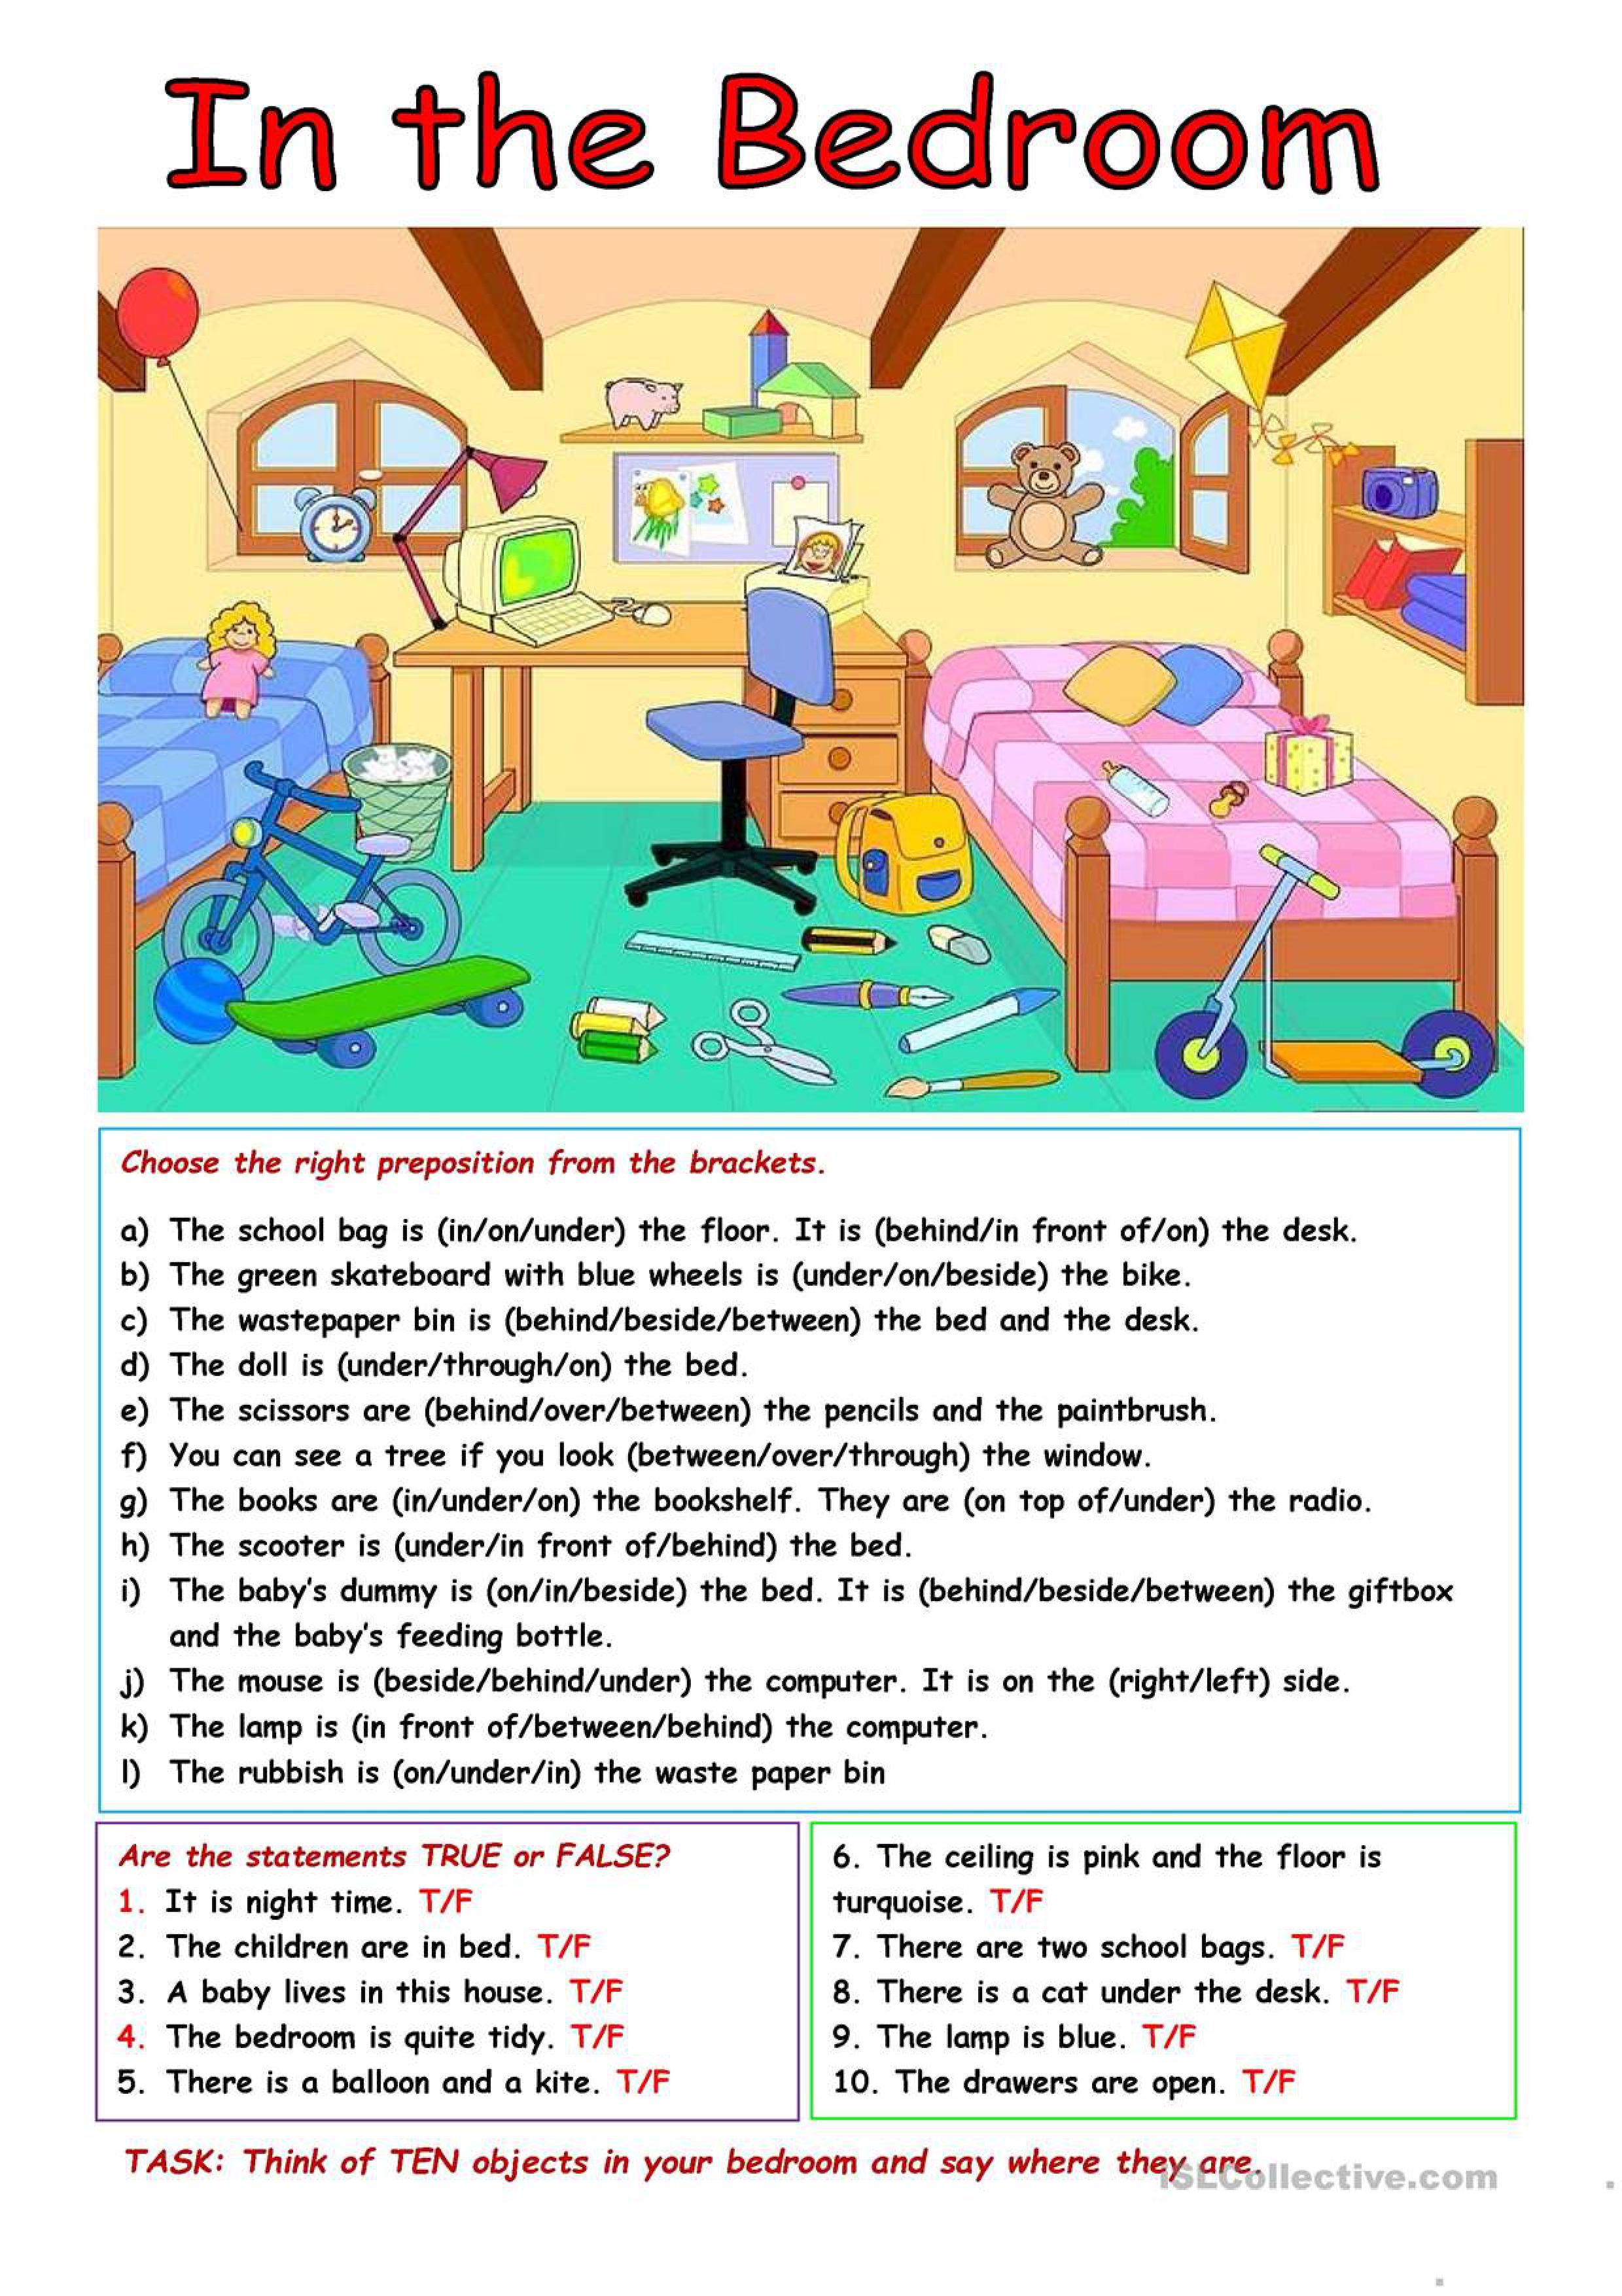 in, under, on, Prepositions of Place, English Lesson for Children